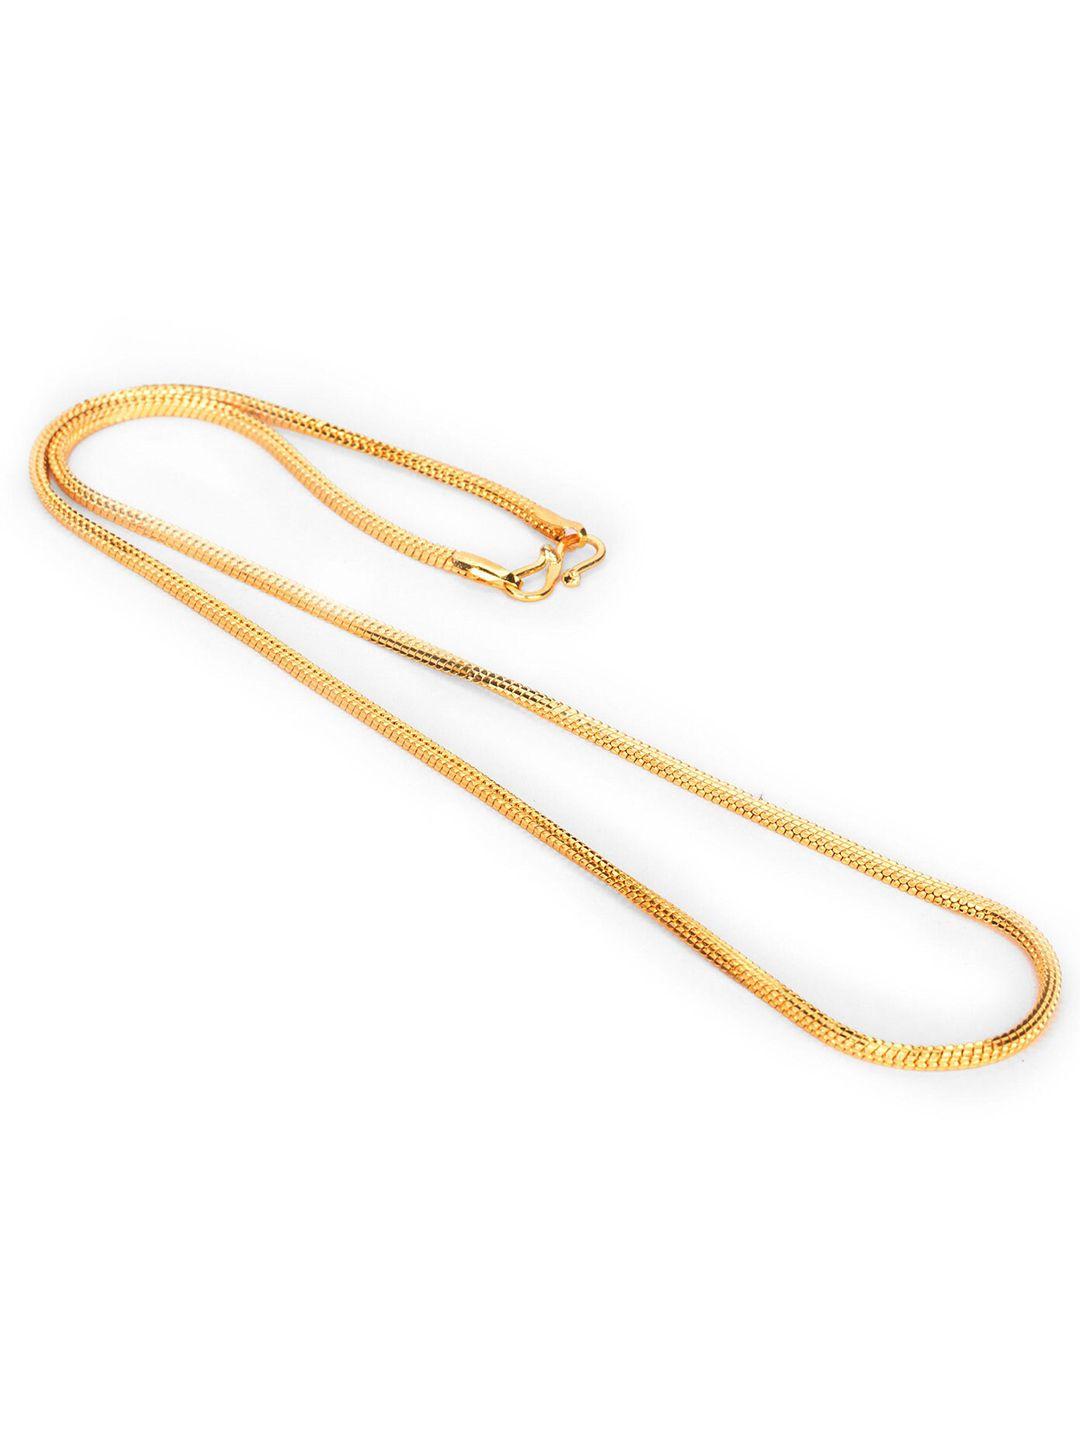 aanyacentric unisex gold-plated chain